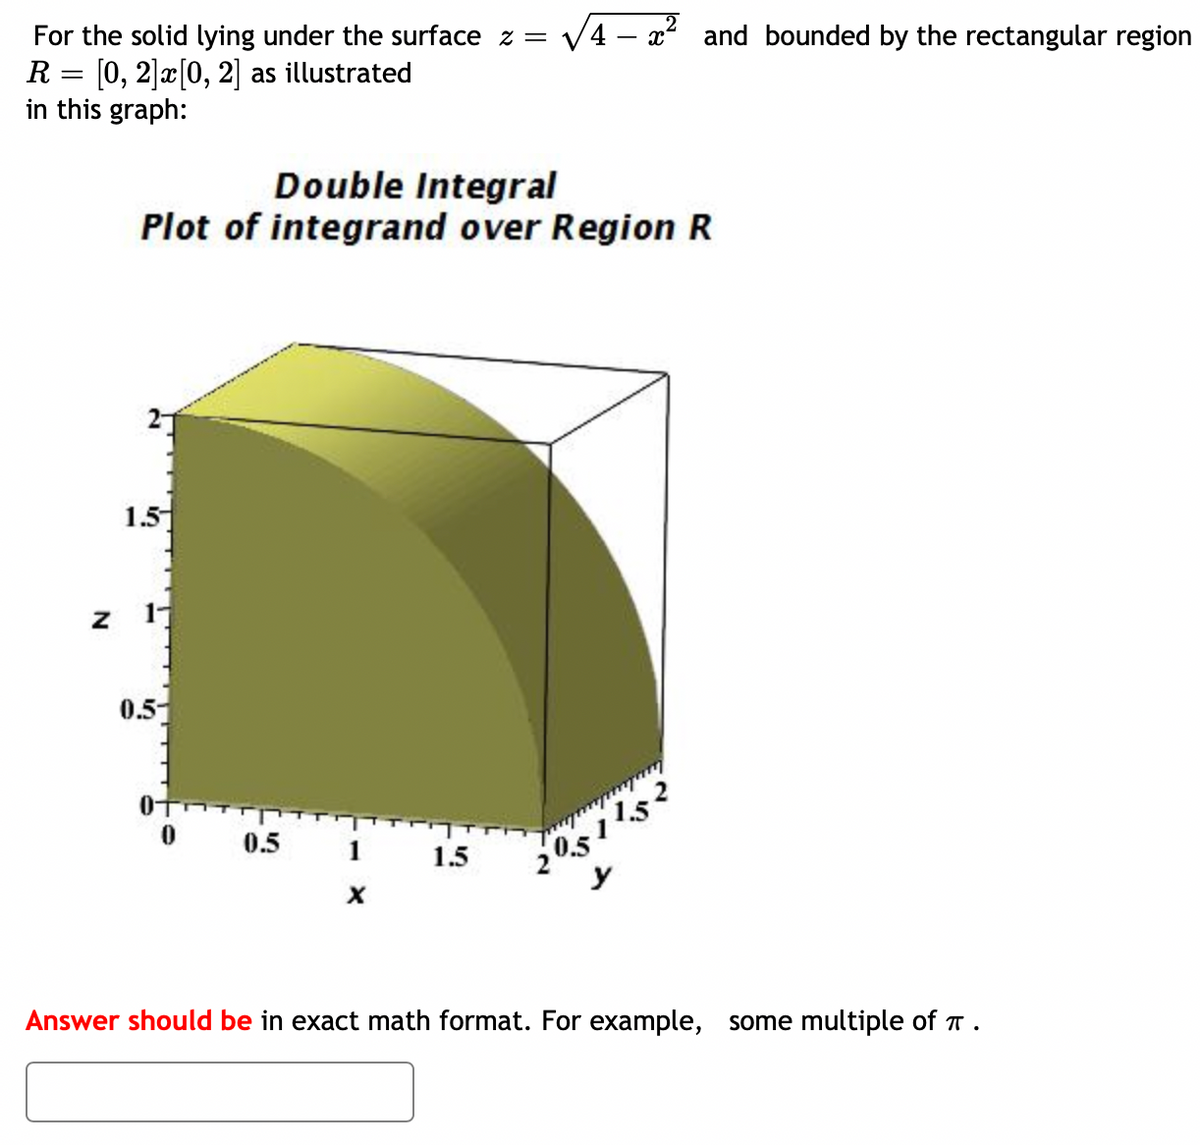 For the solid lying under the surface z =
R= [0, 2] x [0, 2] as illustrated
in this graph:
Z
Double Integral
Plot of integrand over Region R
1.5
17
0.5-
0.5
1
X
√4x² and bounded by the rectangular region
1.5
205115
y
Answer should be in exact math format. For example, some multiple of .